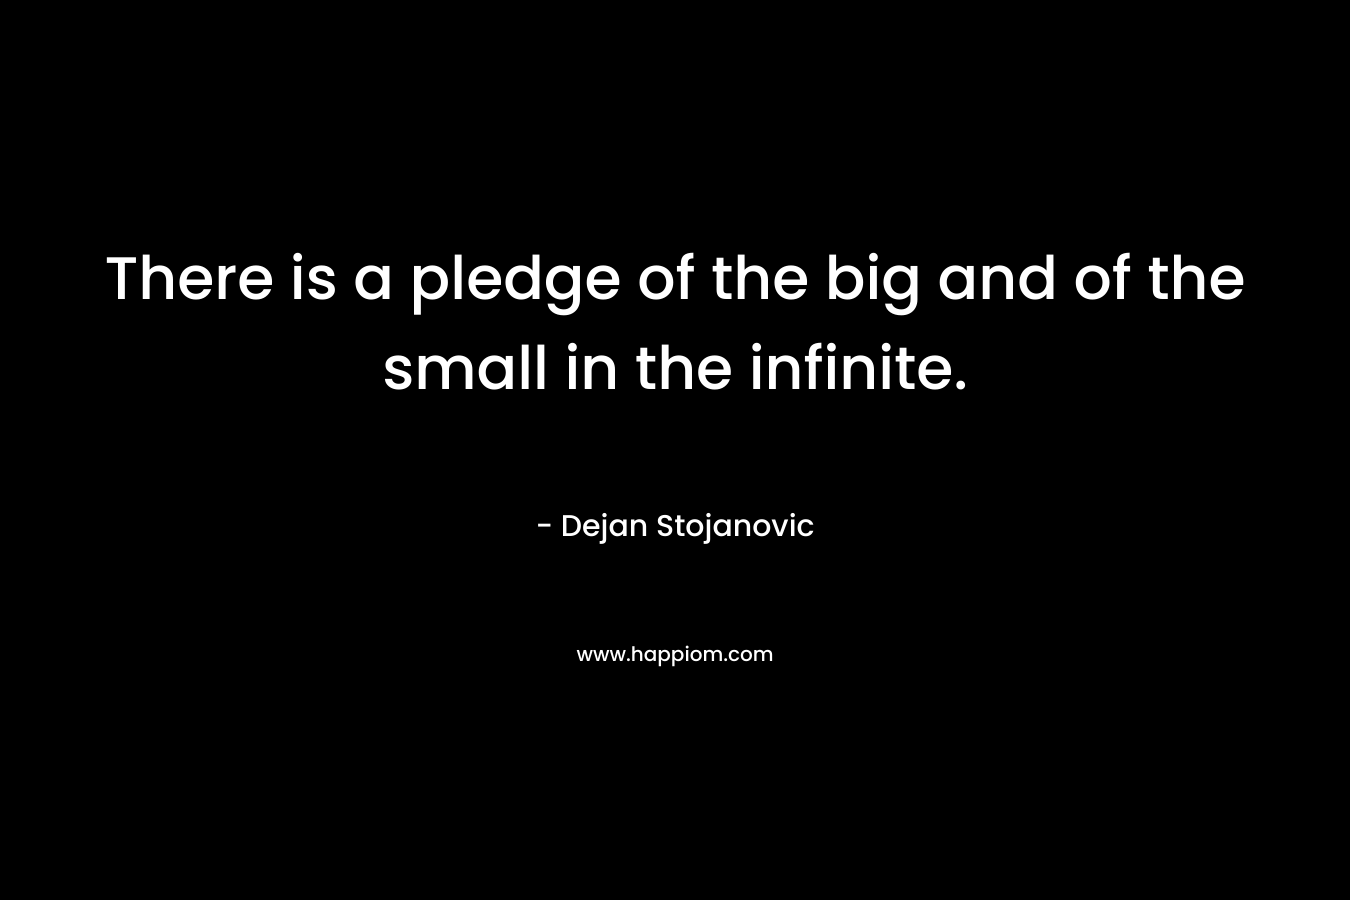 There is a pledge of the big and of the small in the infinite.